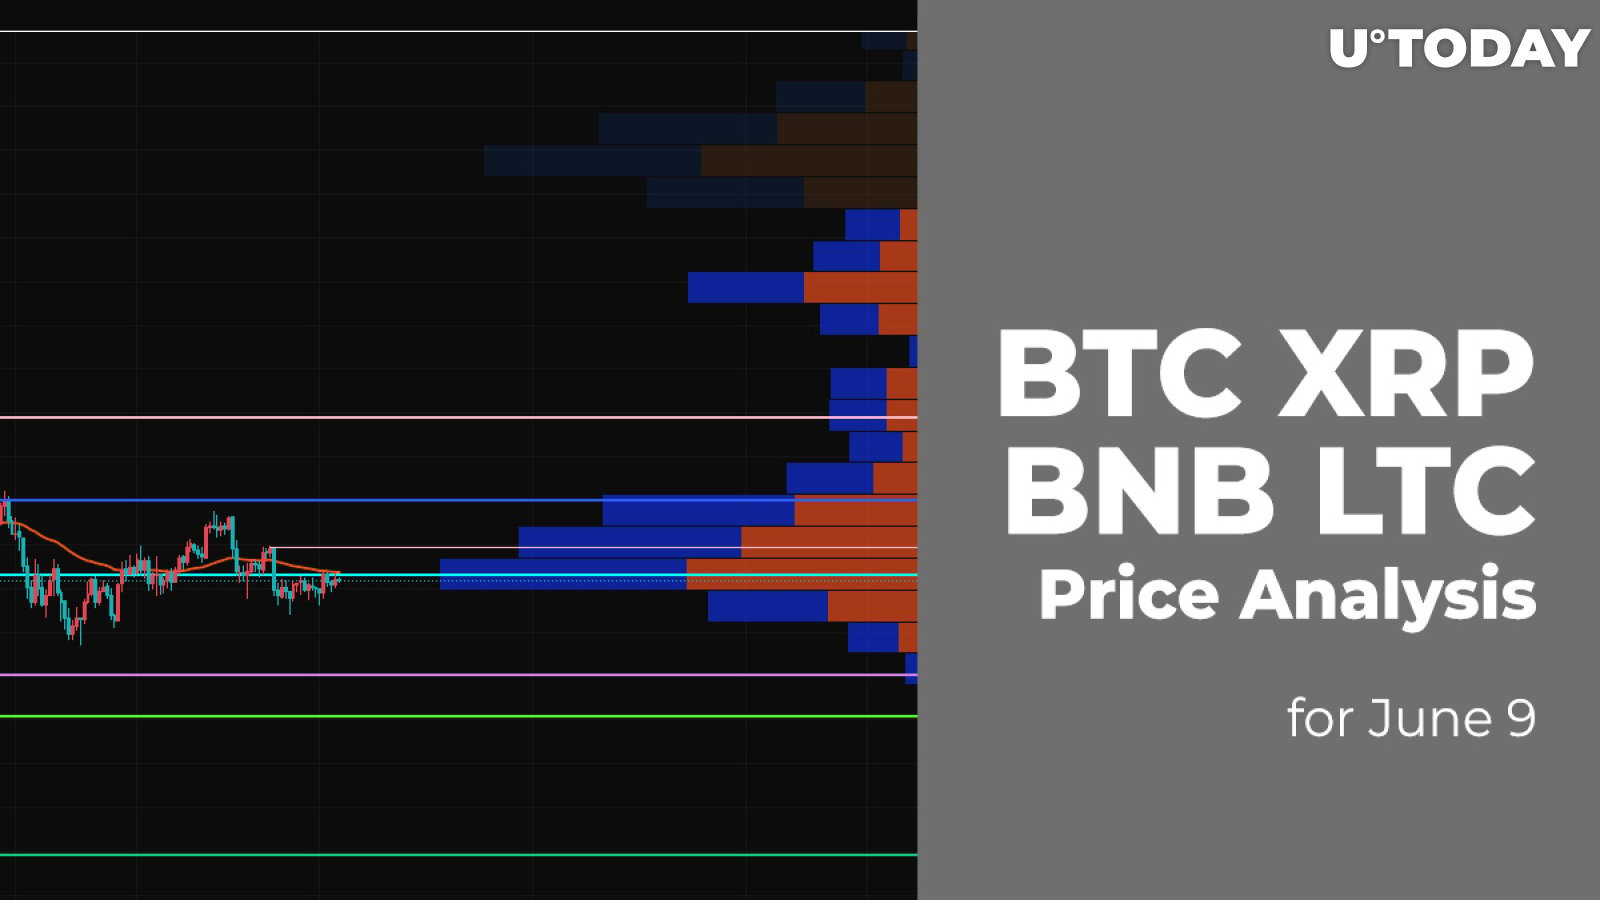 BTC, XRP, BNB and LTC Price Analysis for June 9